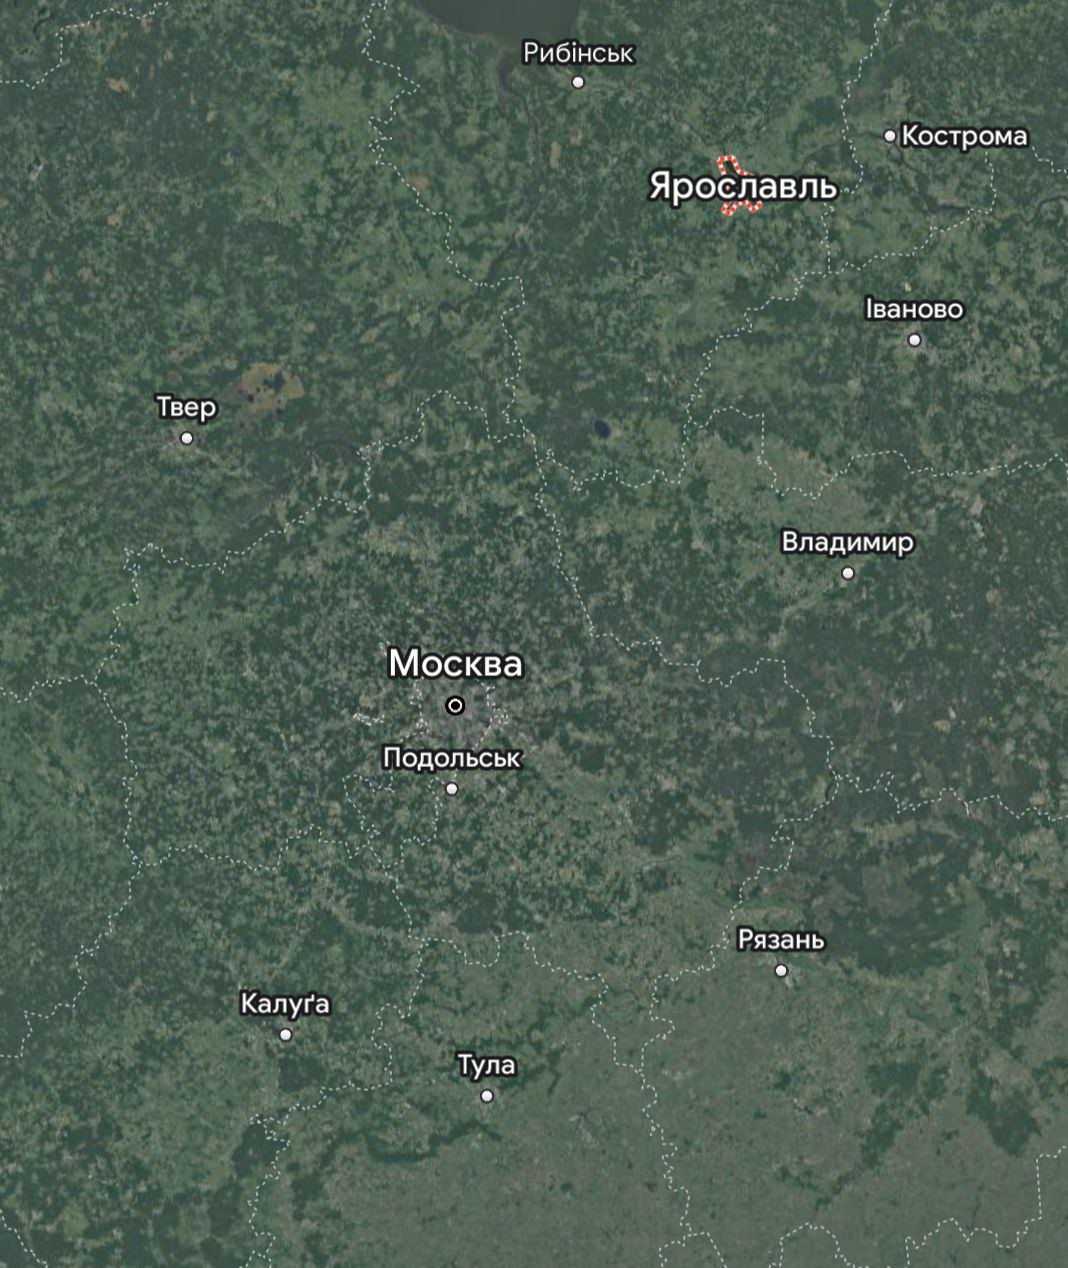 Moscow is about 272 kilometres from Yaroslavl. 